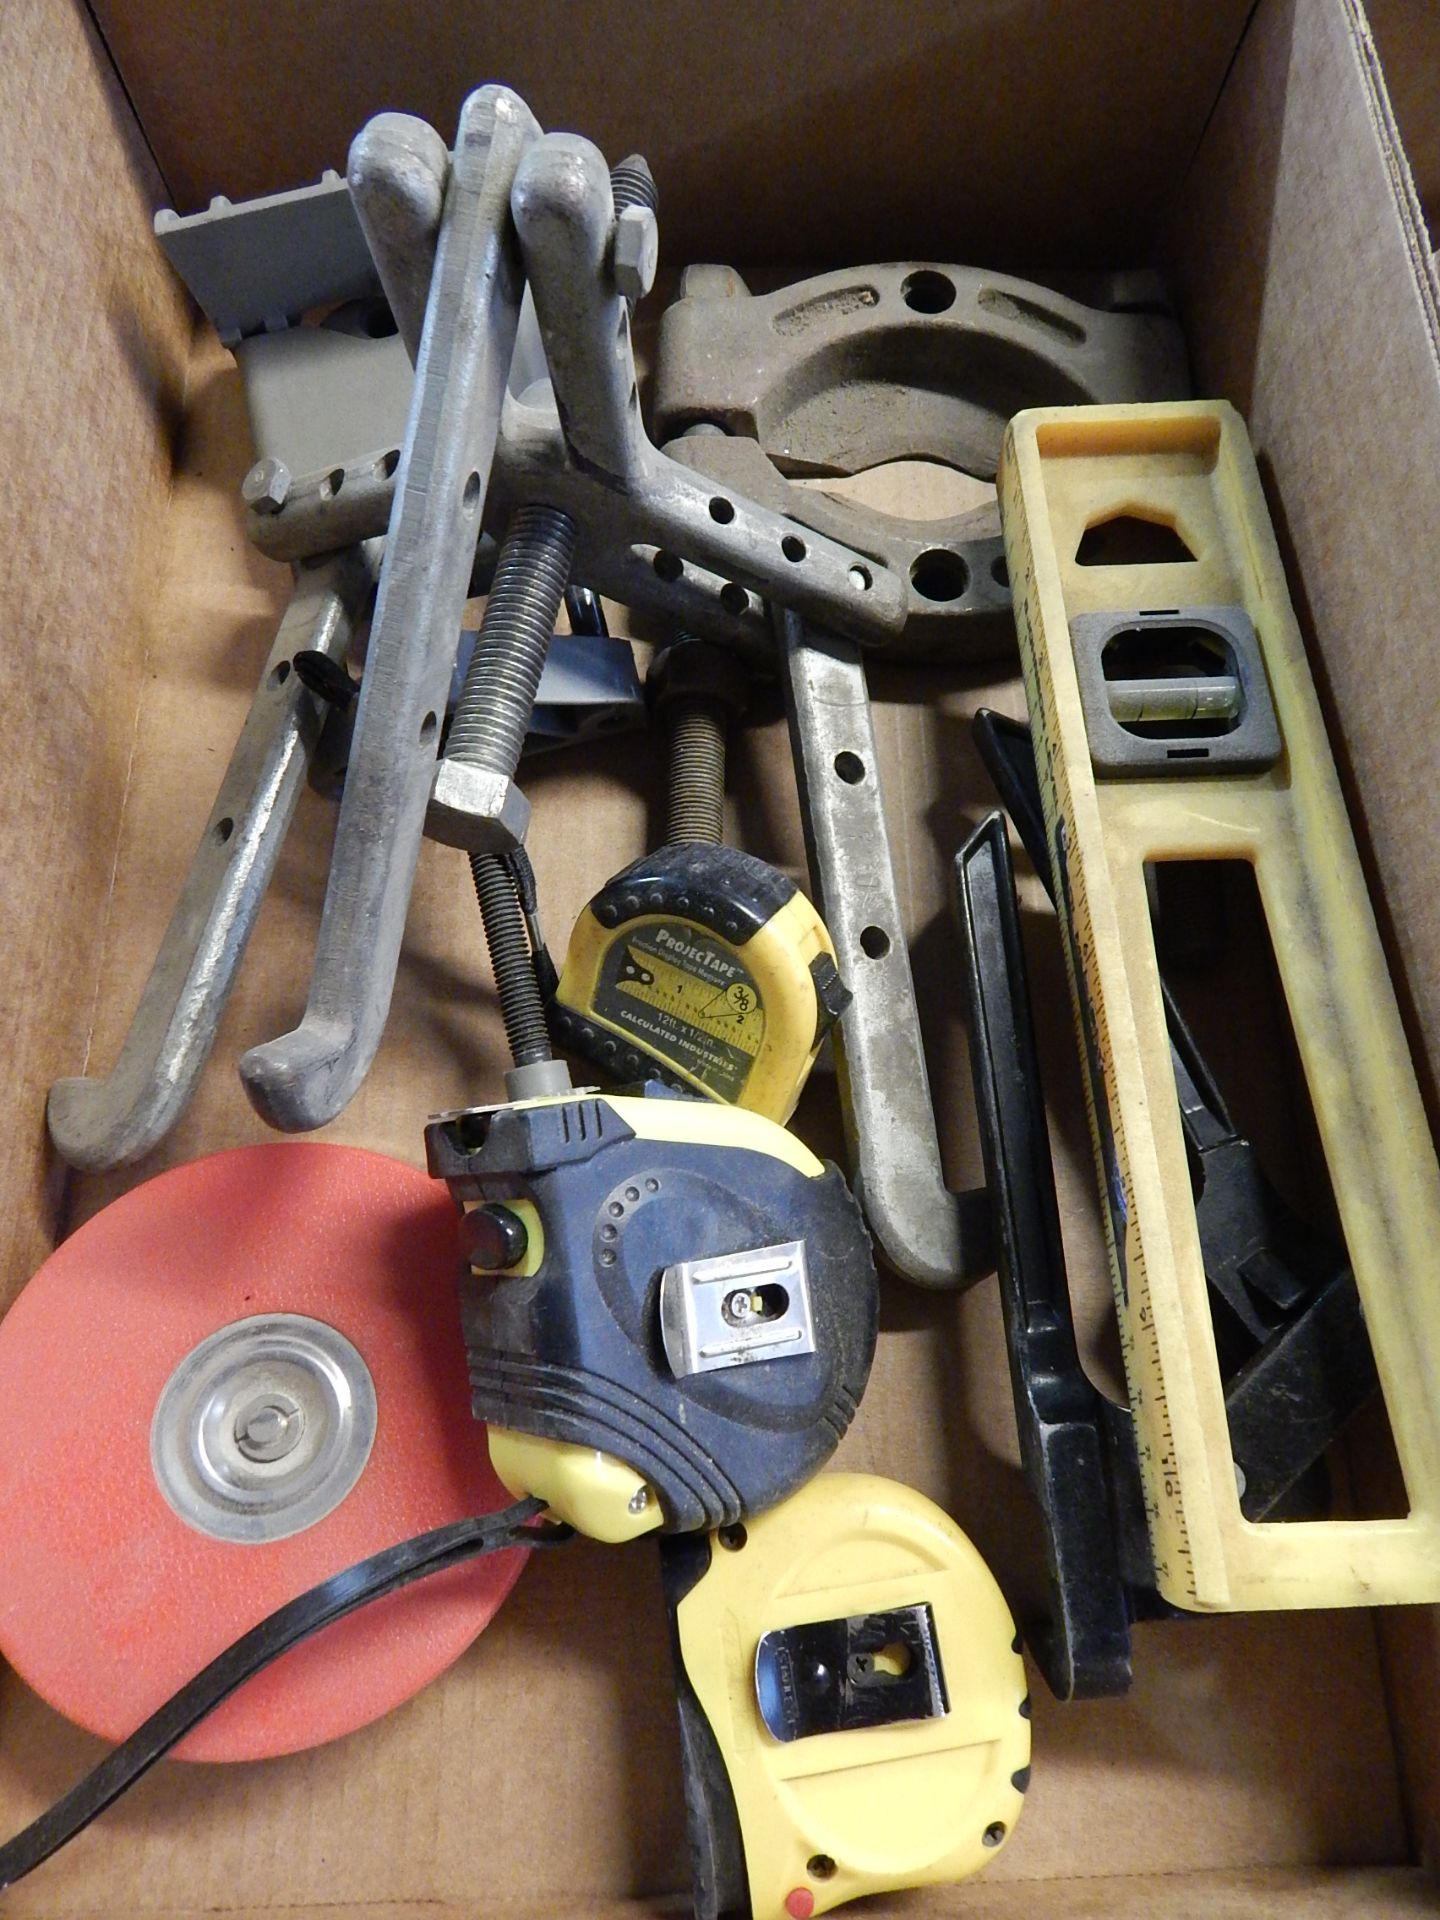 Gear Puller, Bearing Puller and Misc. Tools